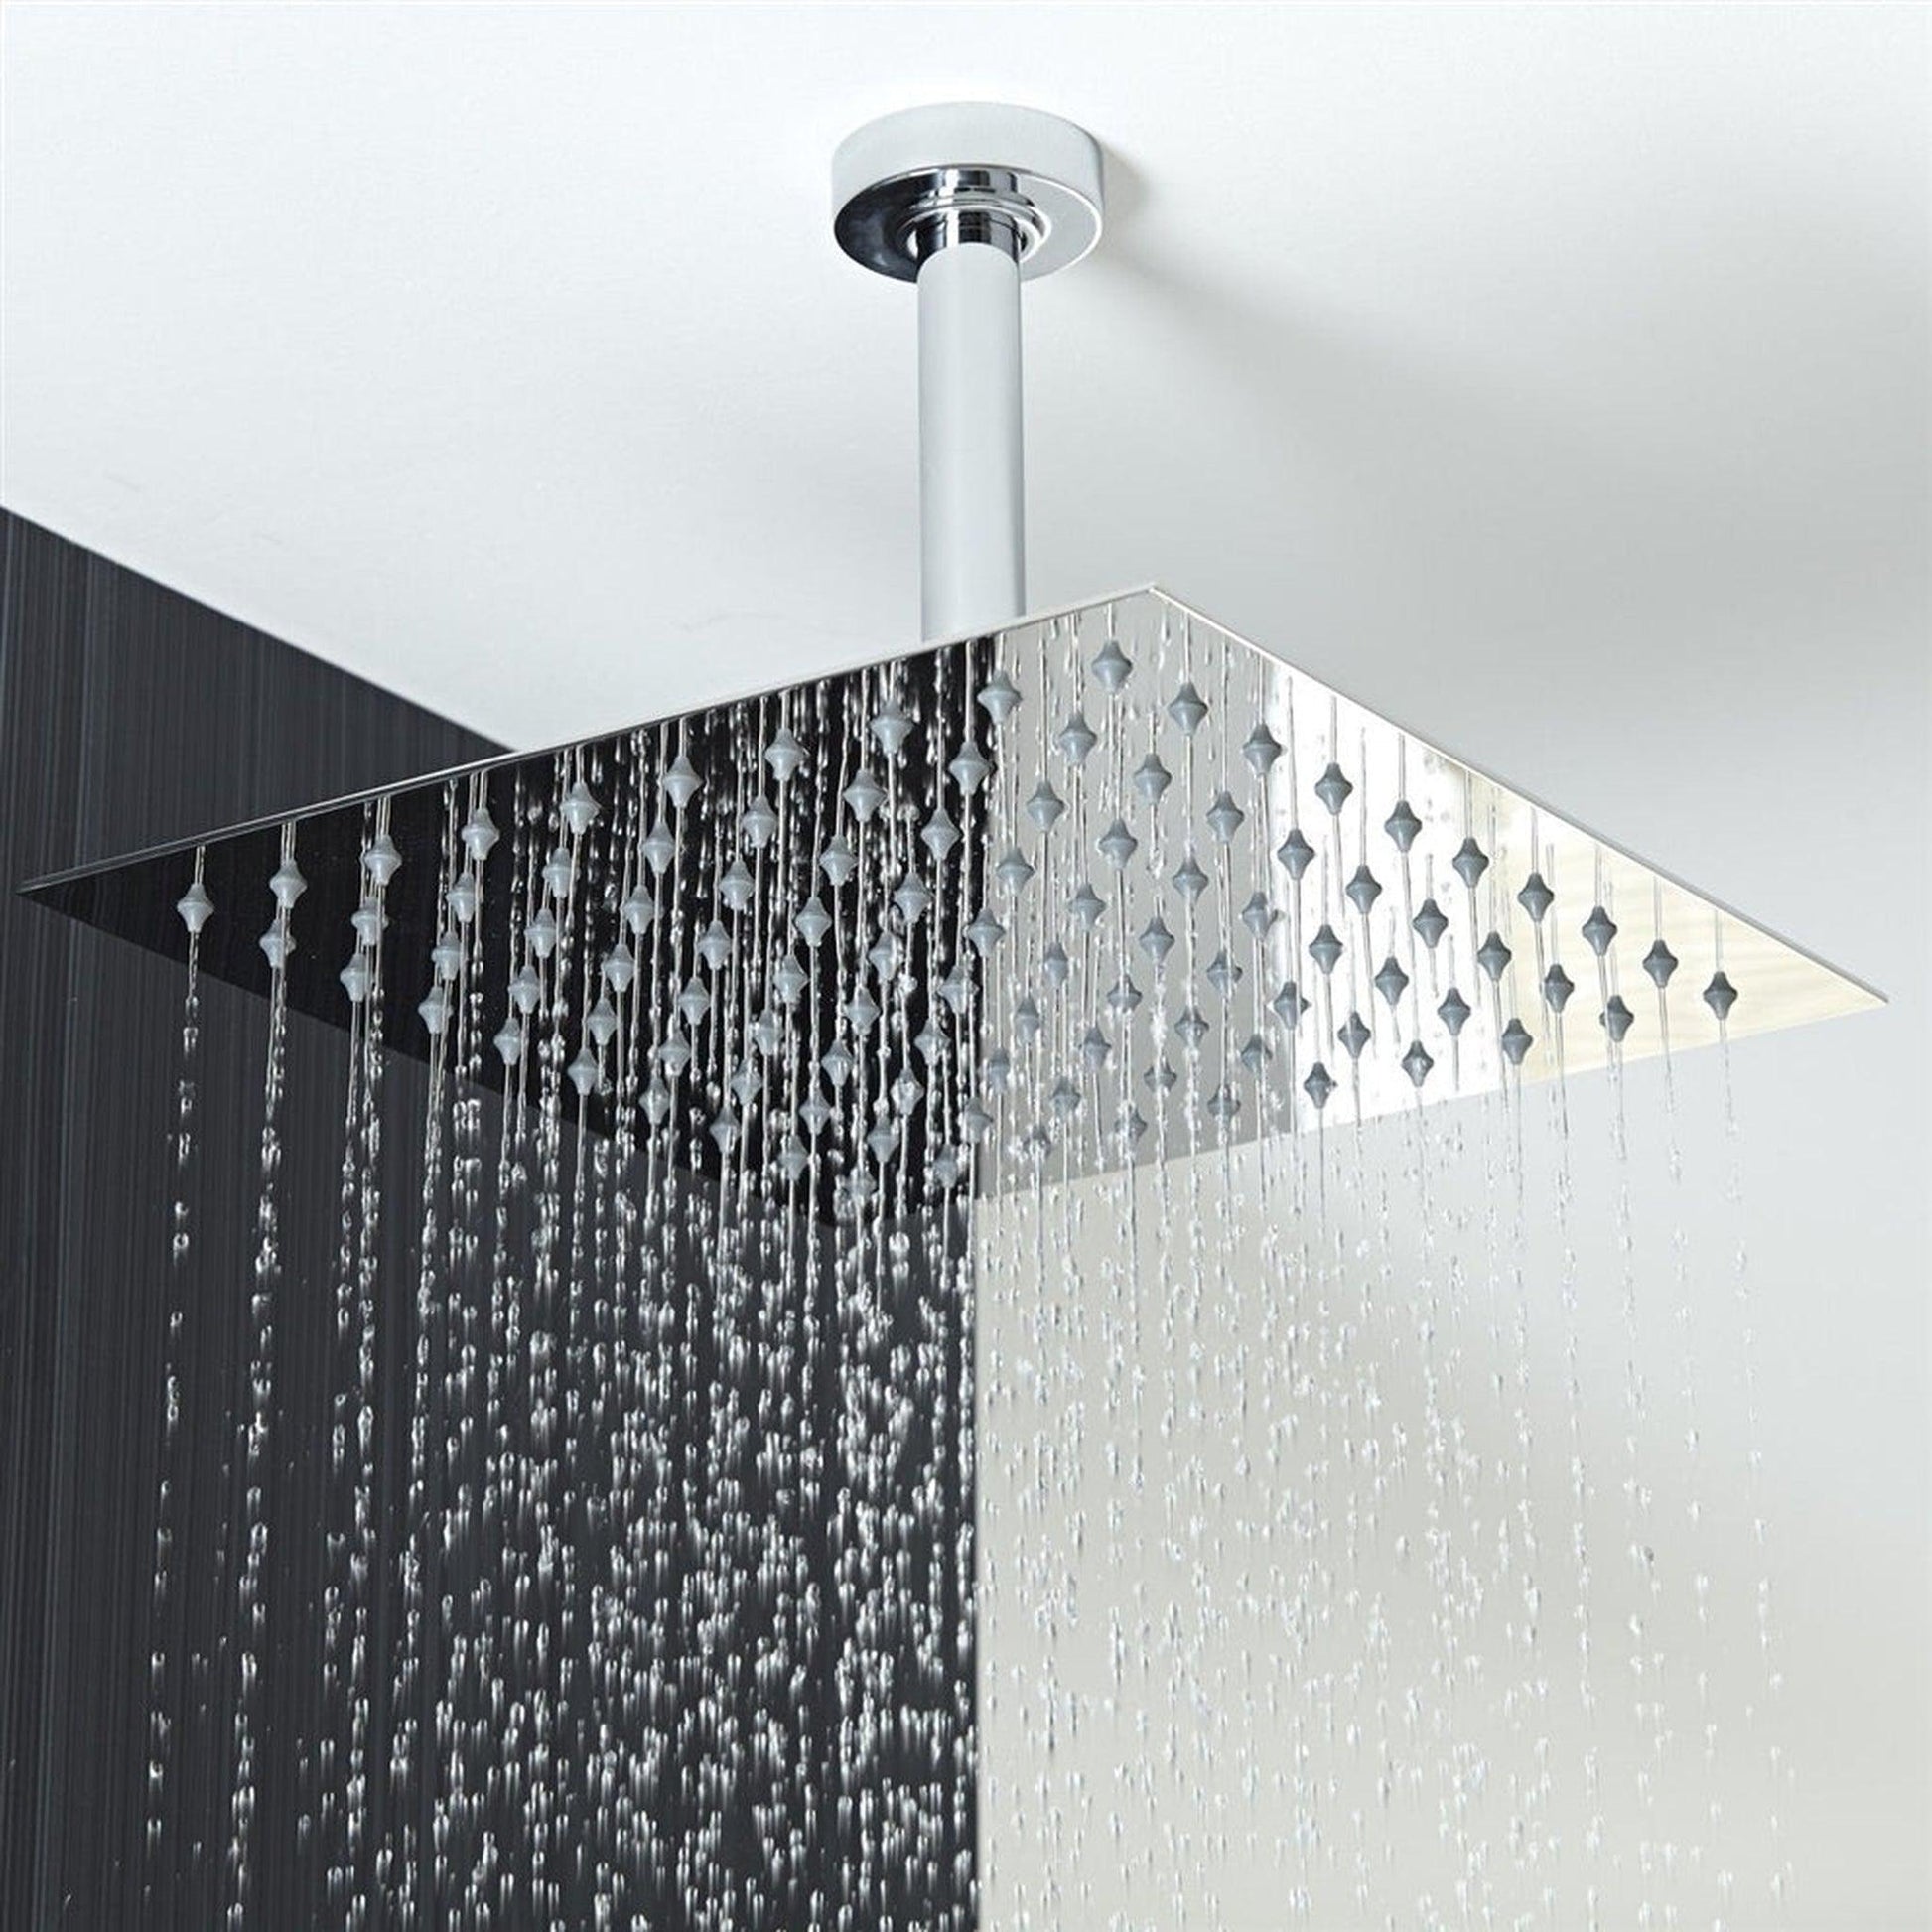 Fontana Liverpool 12" Chrome Square Ceiling Mounted Thermostatic Rainfall Shower System With Hand Shower and Without Water Powered LED Lights